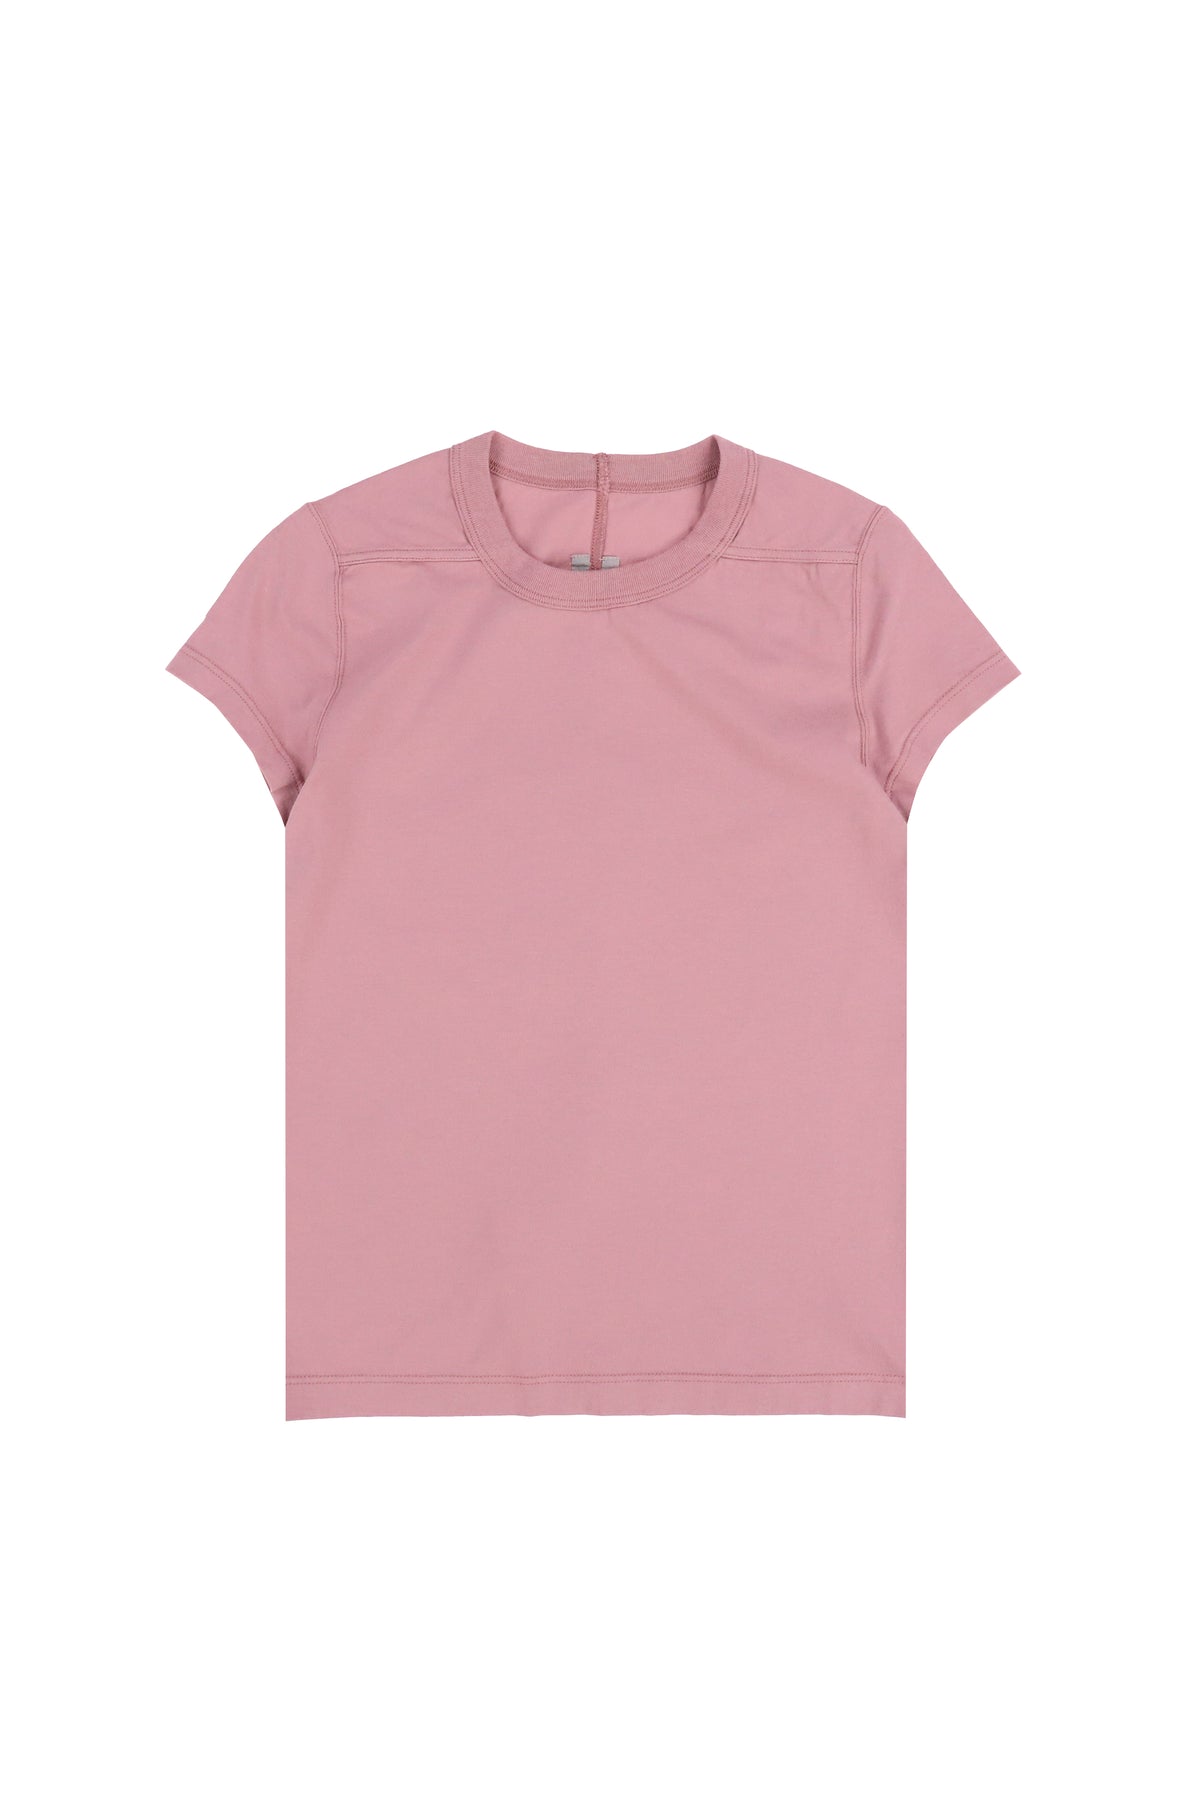 CROPPED LEVEL T / DUSTY PINK